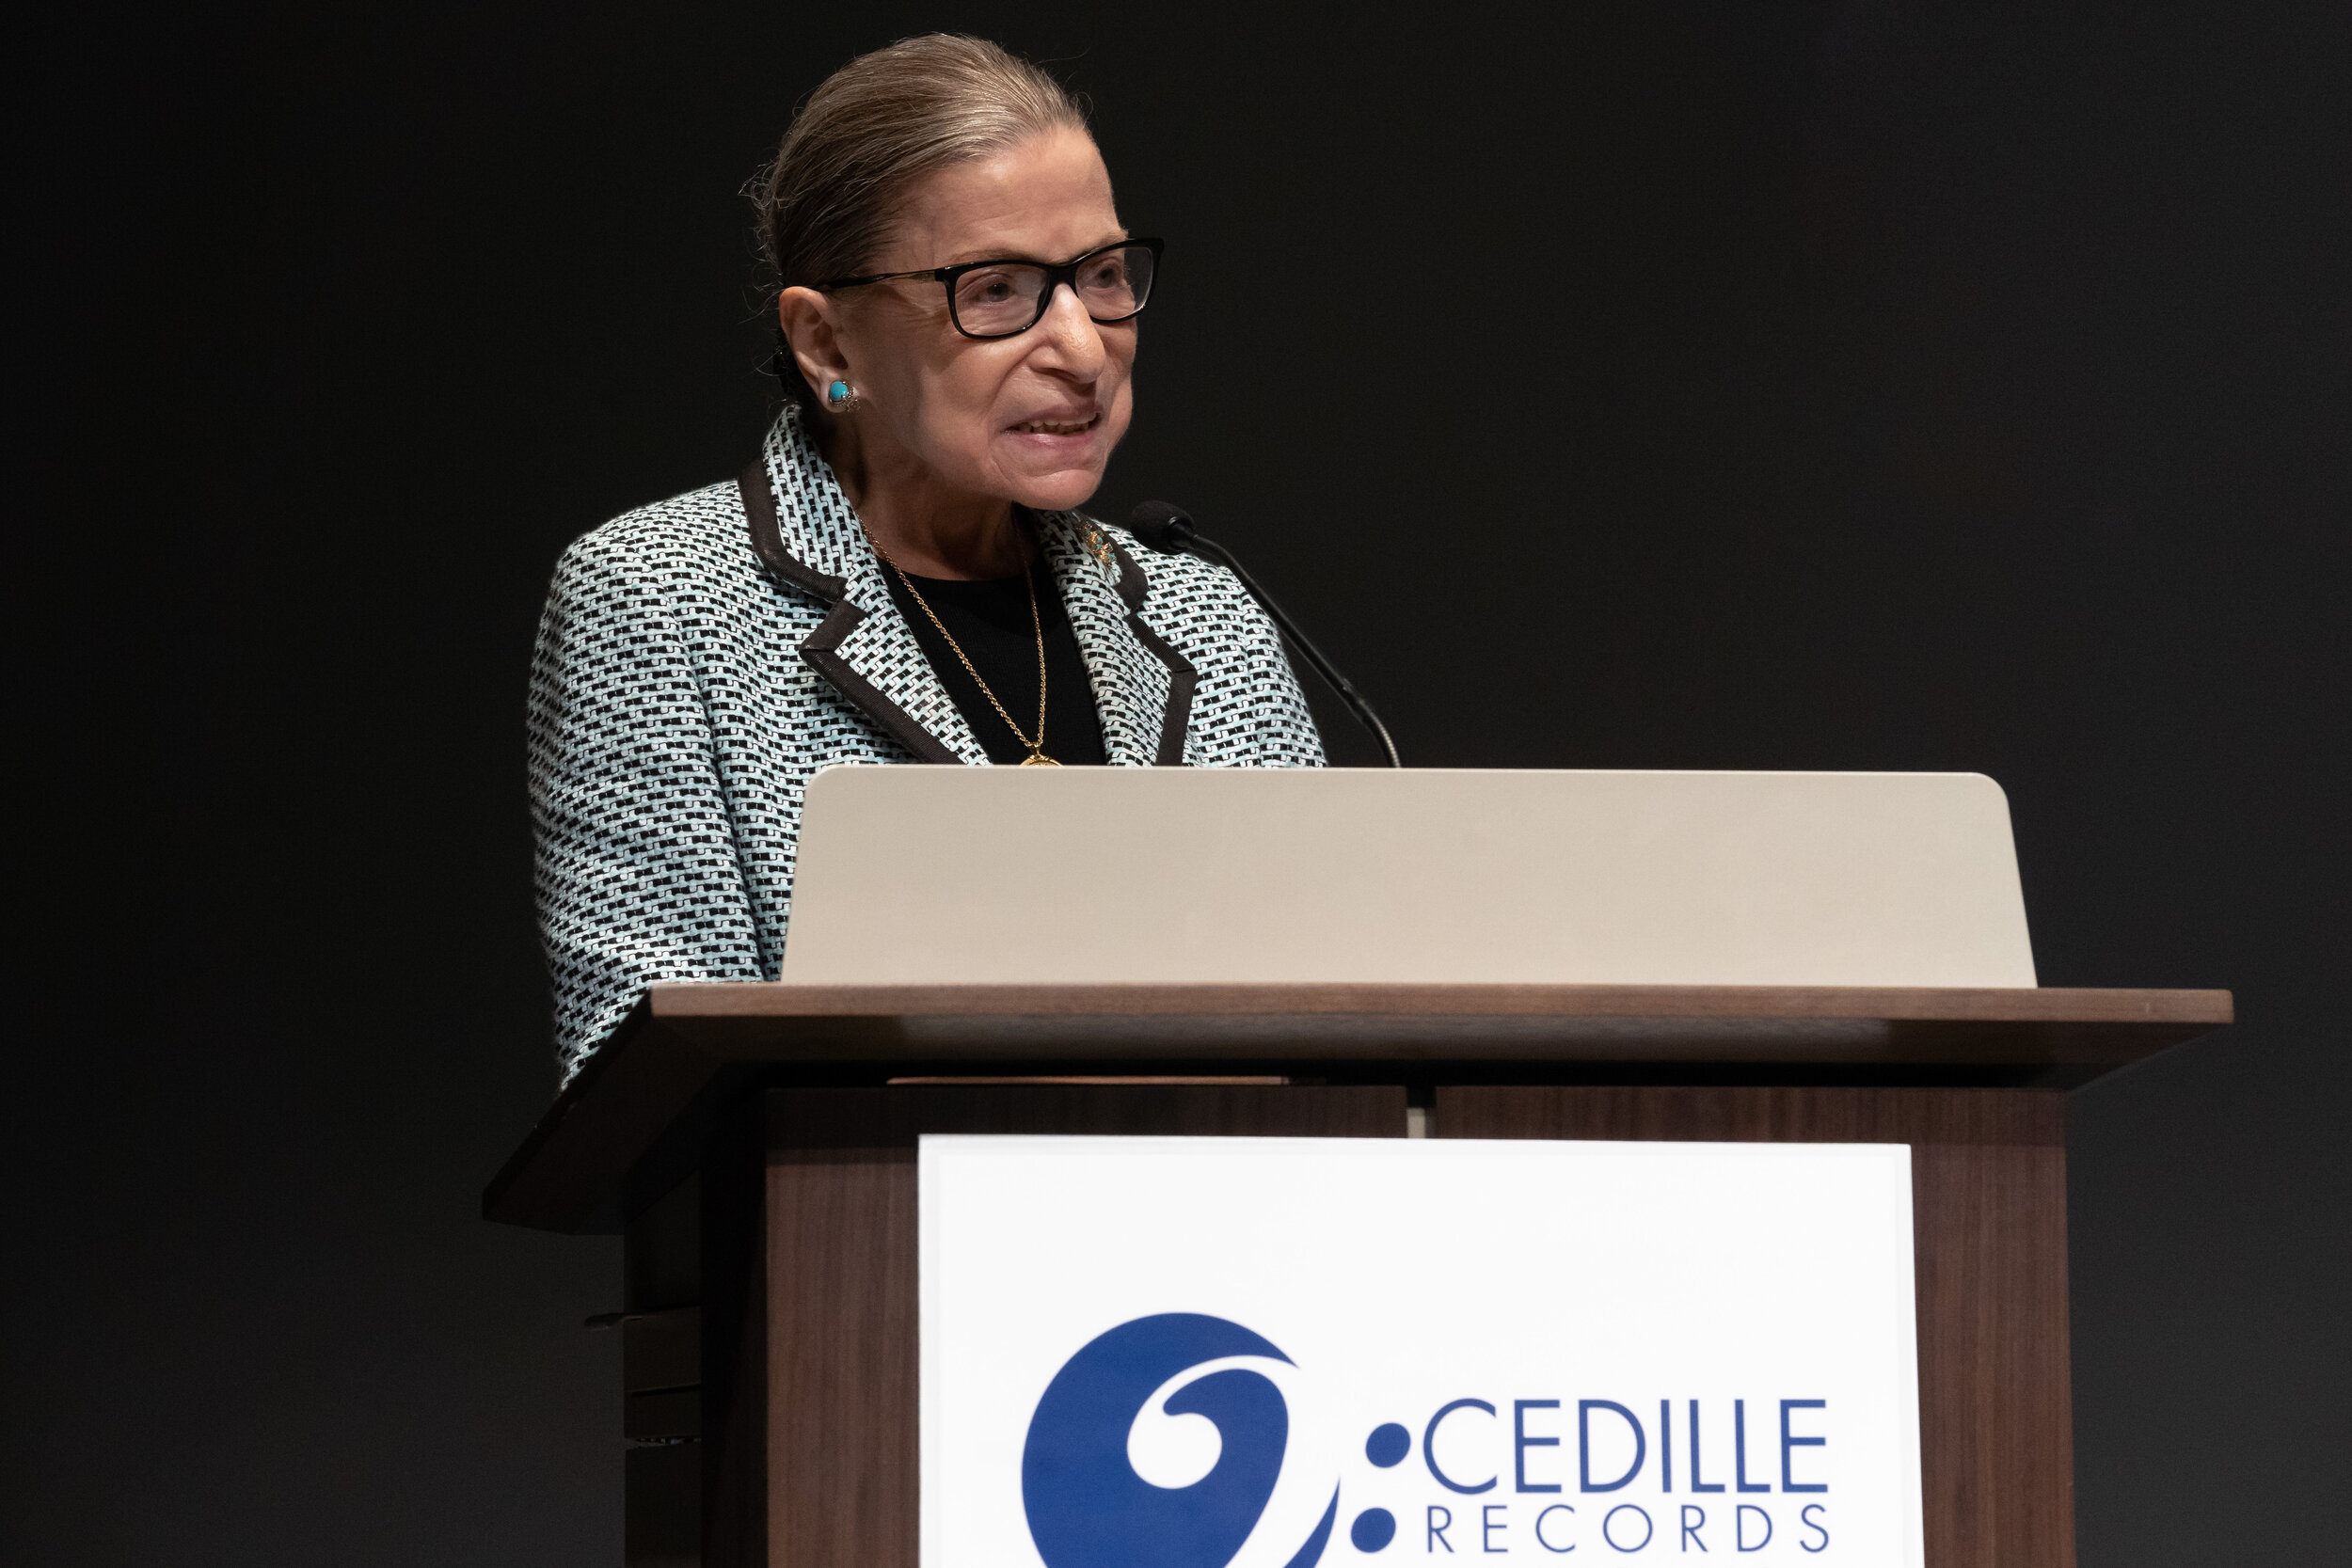  September: Justice Ruth Bader Ginsburg addresses an adoring audience at the 30th Anniversary Gala for Cedille Records. 